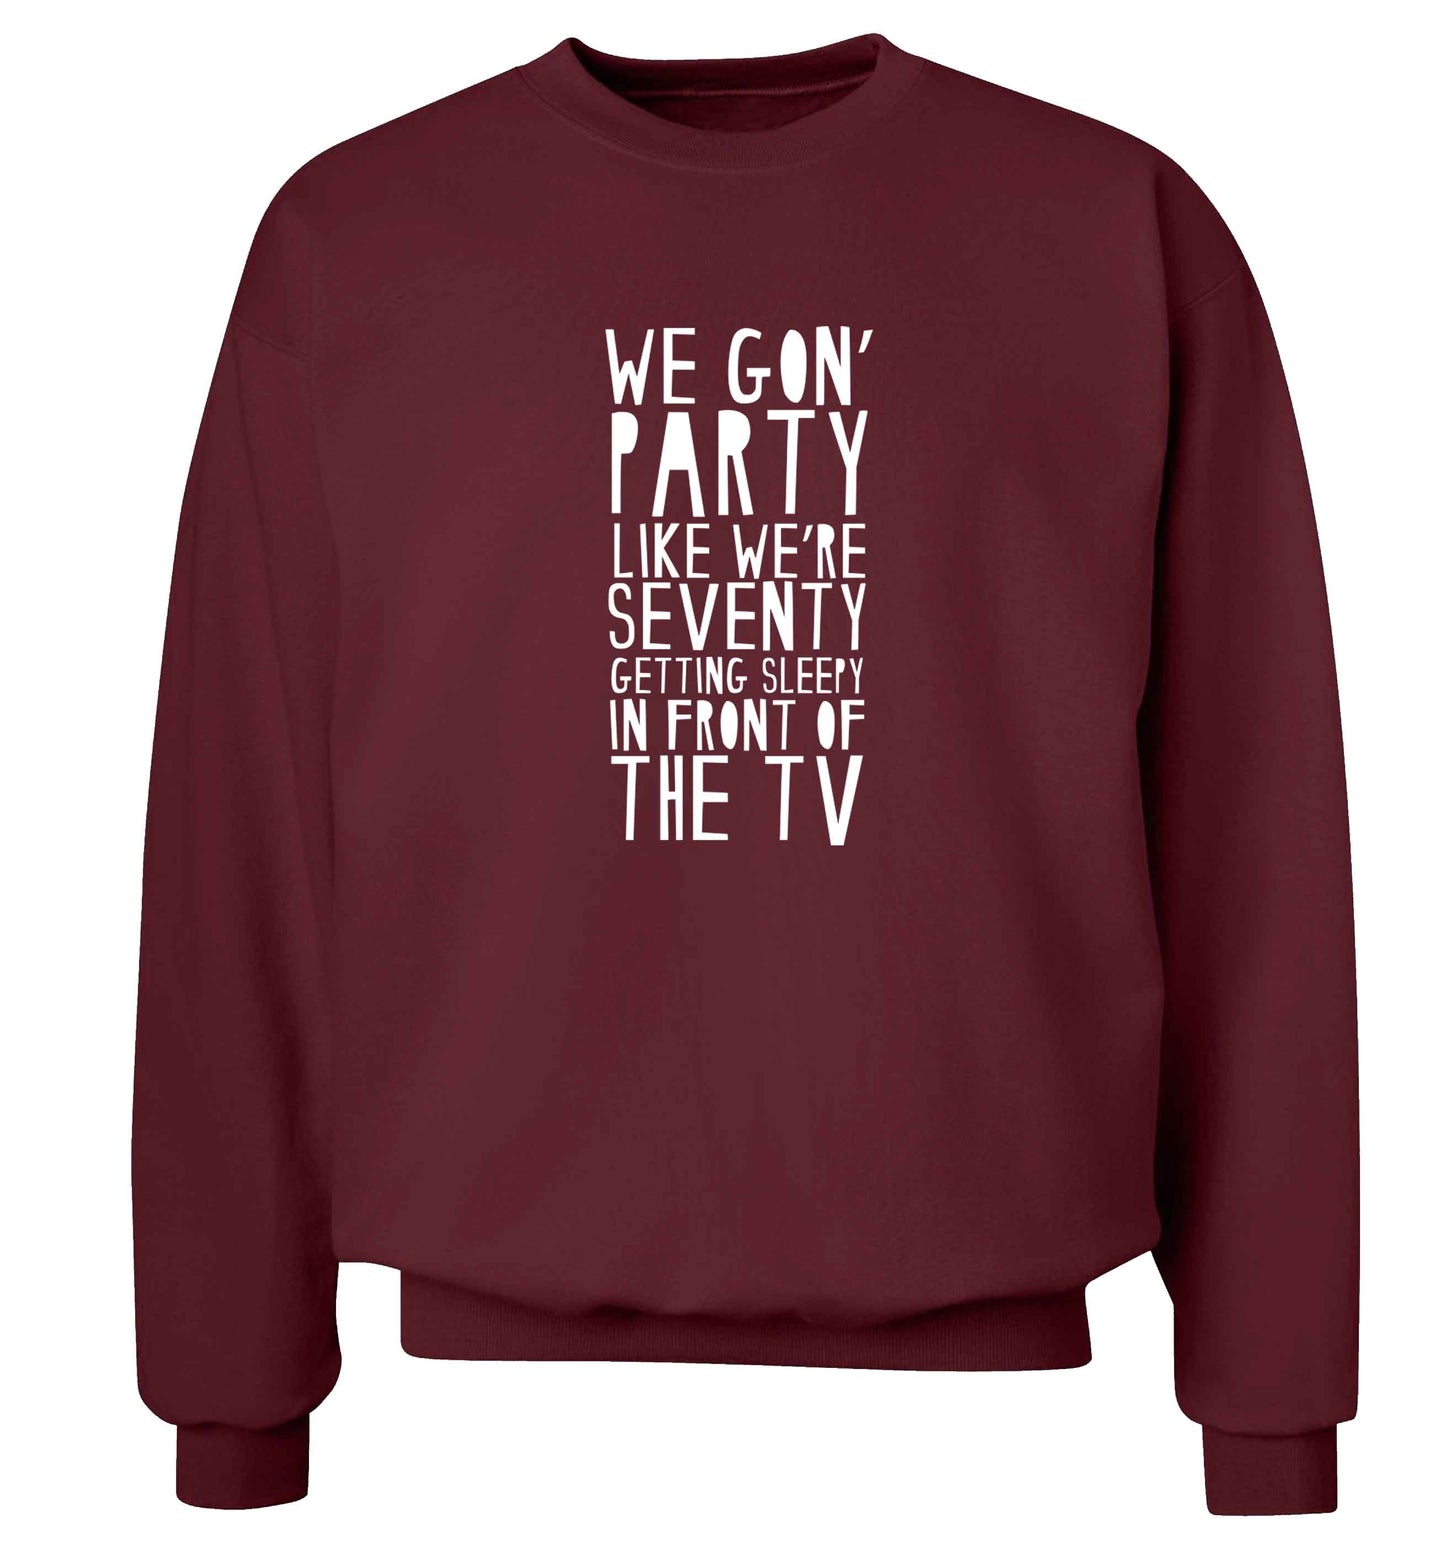 We gon' party like we're seventy getting sleepy in front of the TV adult's unisex maroon sweater 2XL